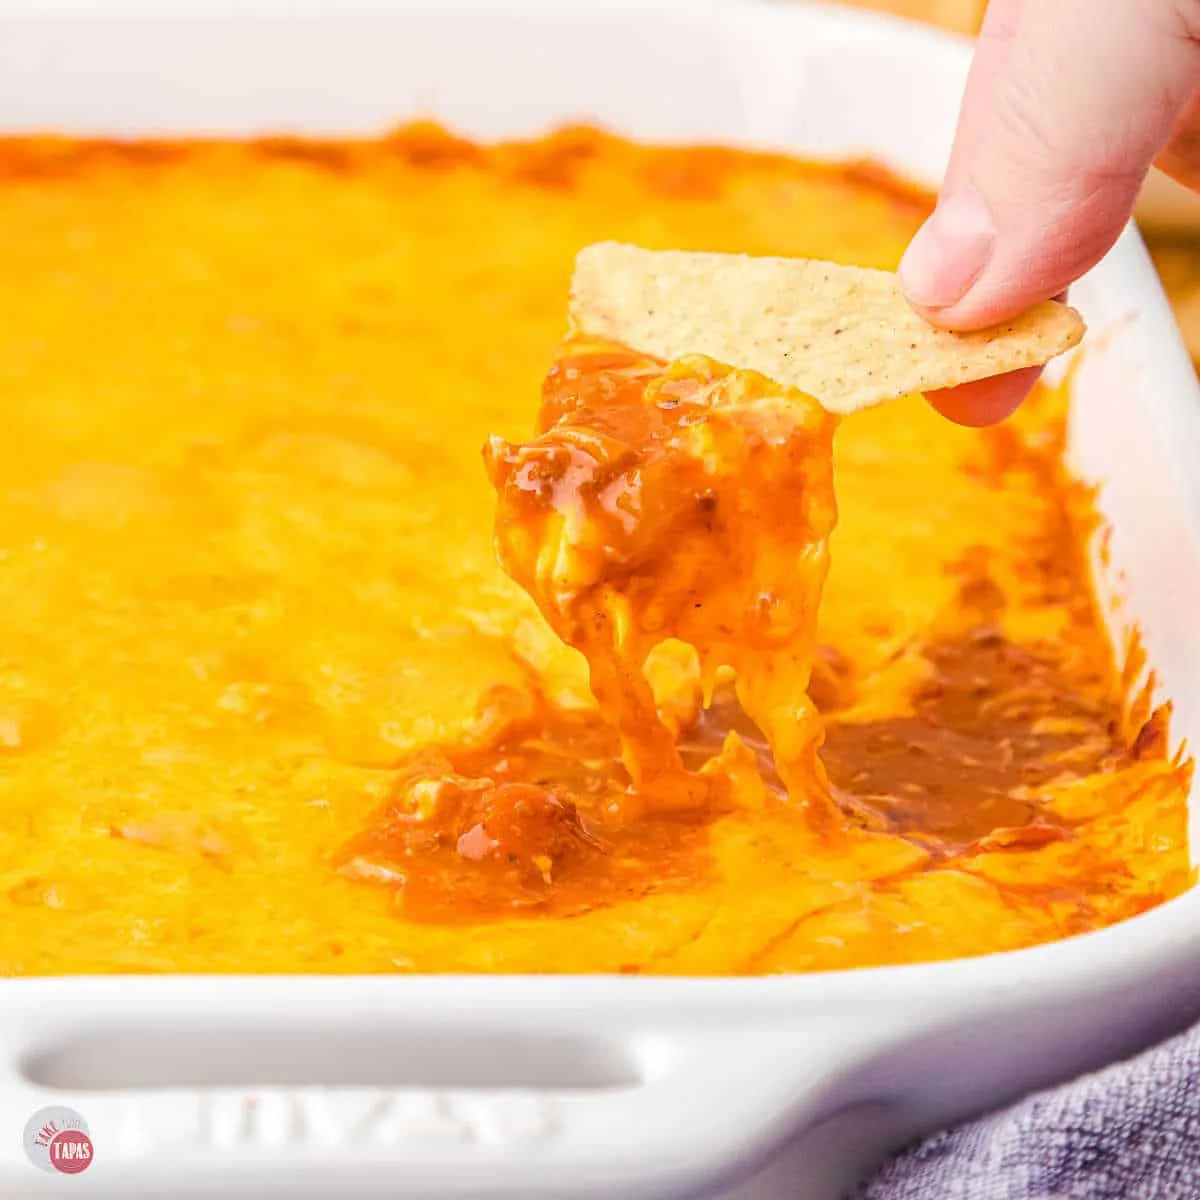 hand scooping chili and cheese out of a casserole dish